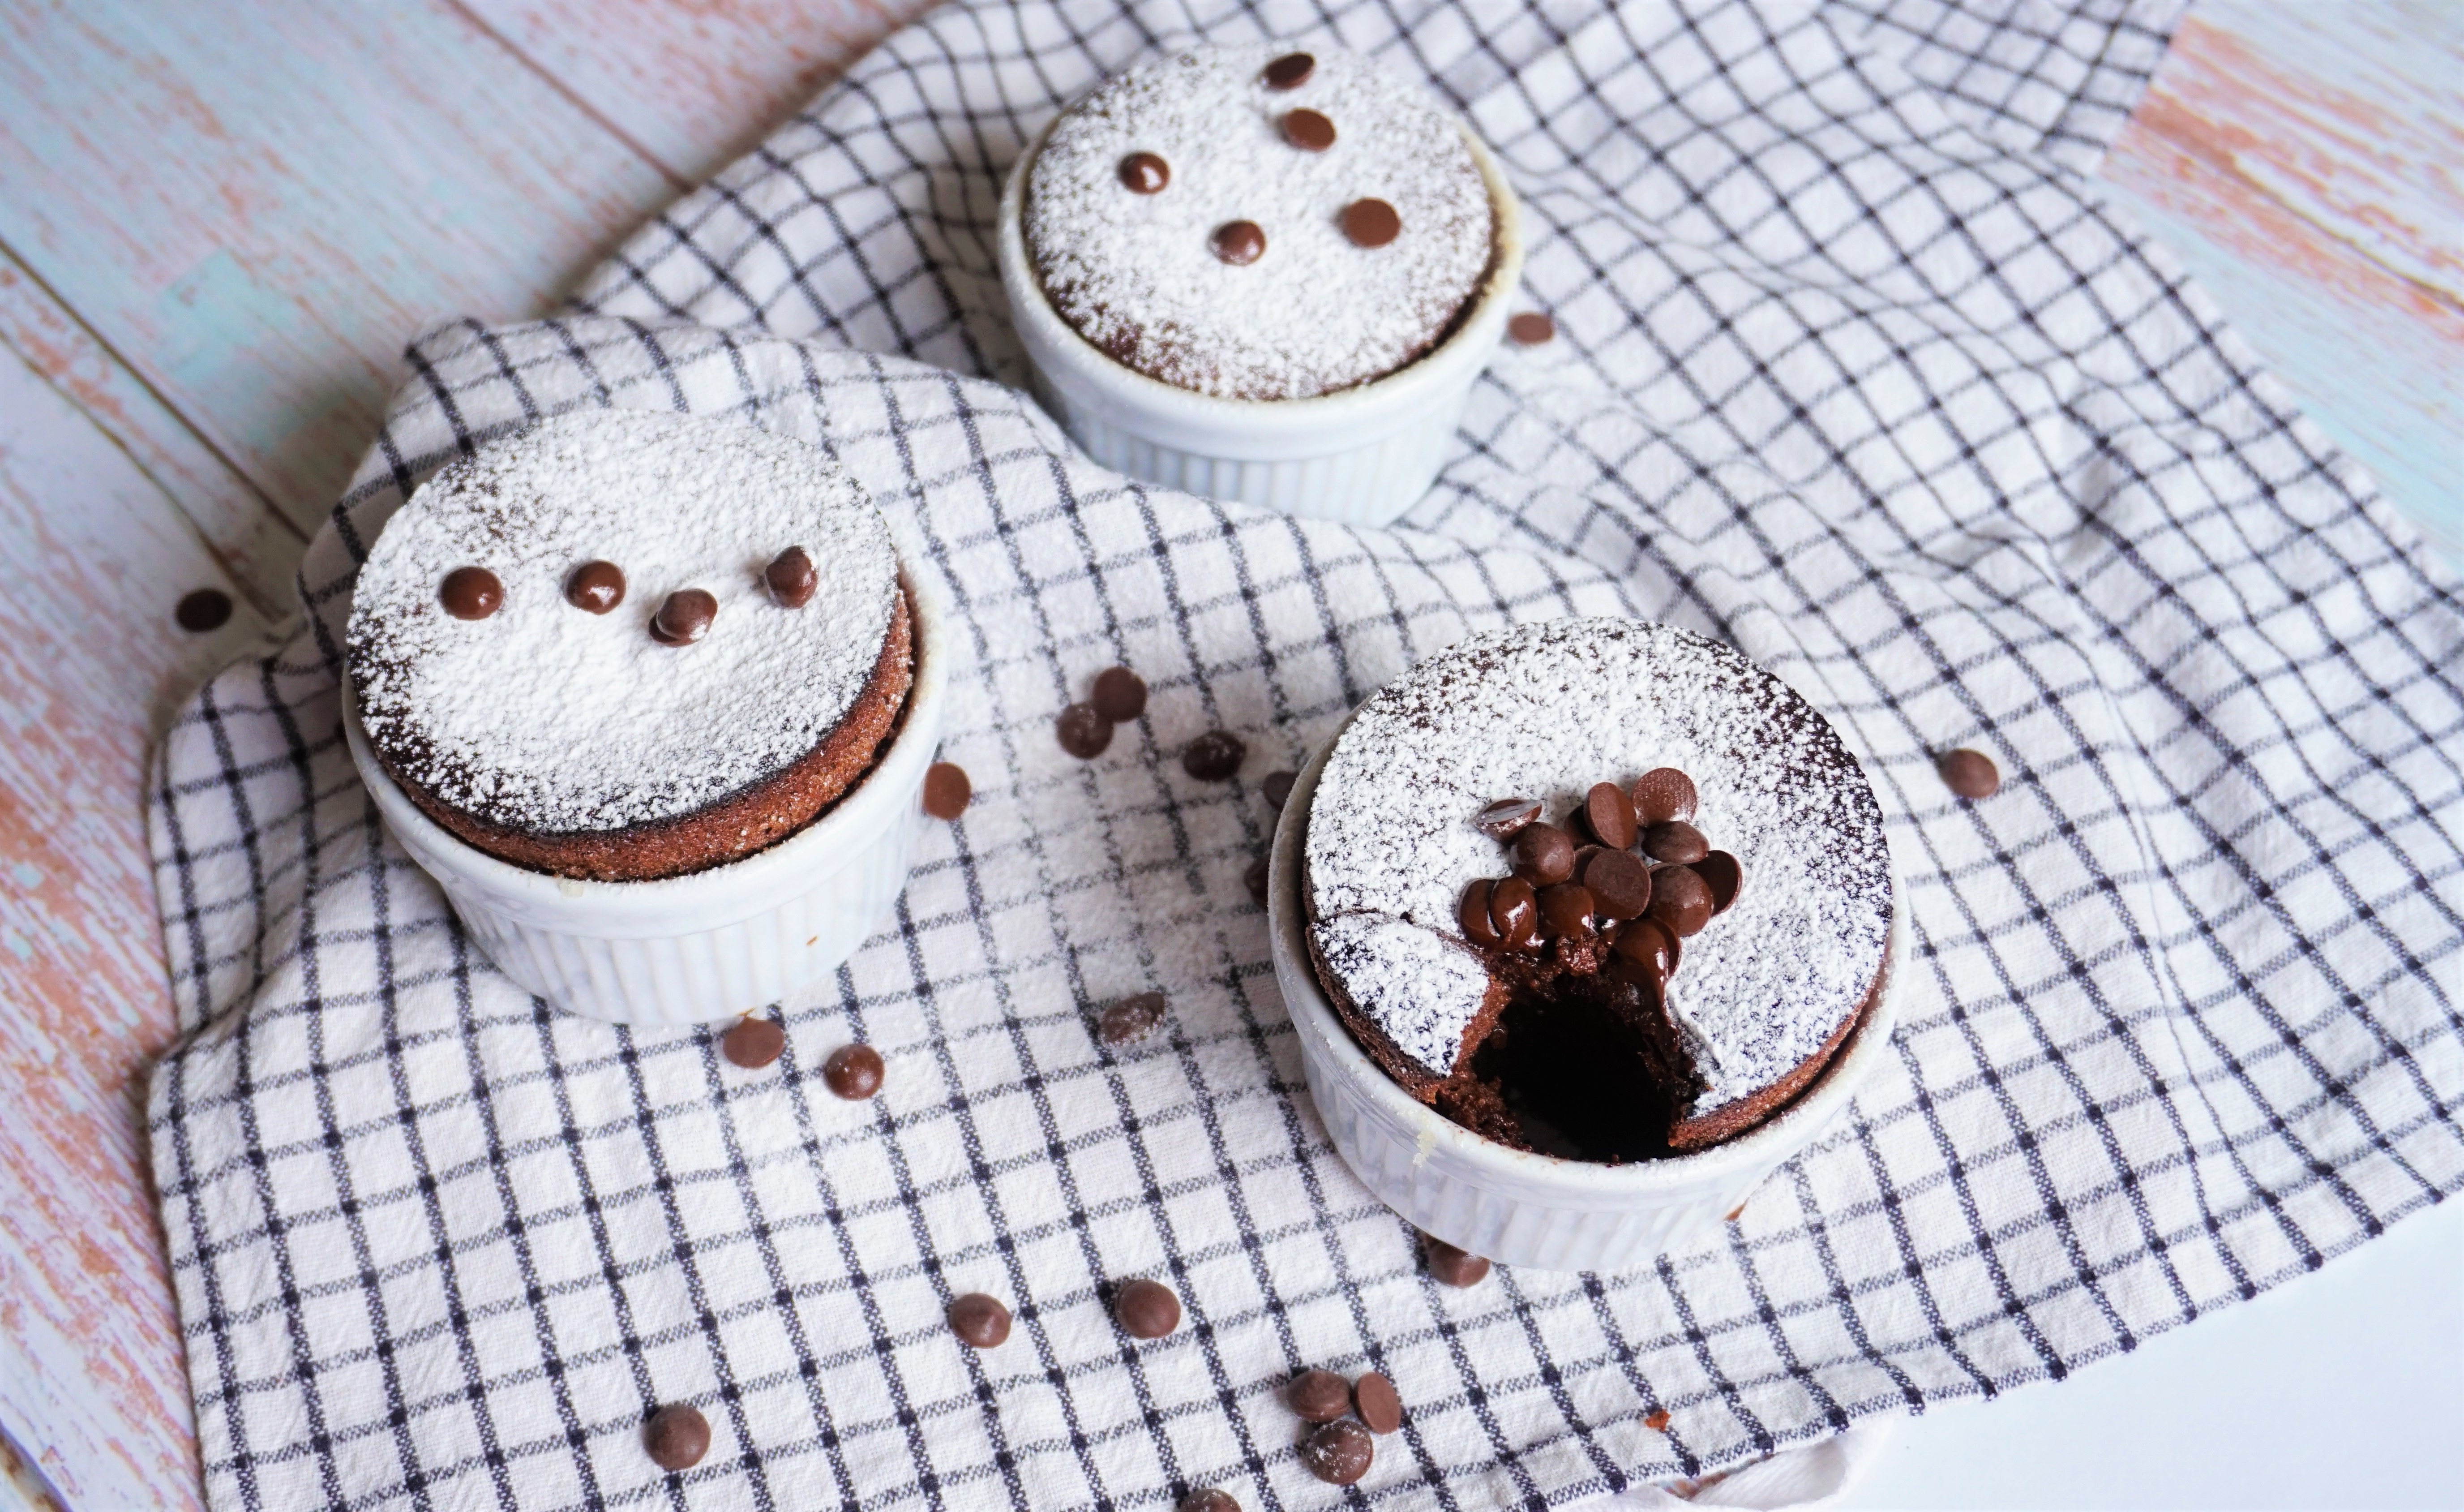 French Chocolate Soufle